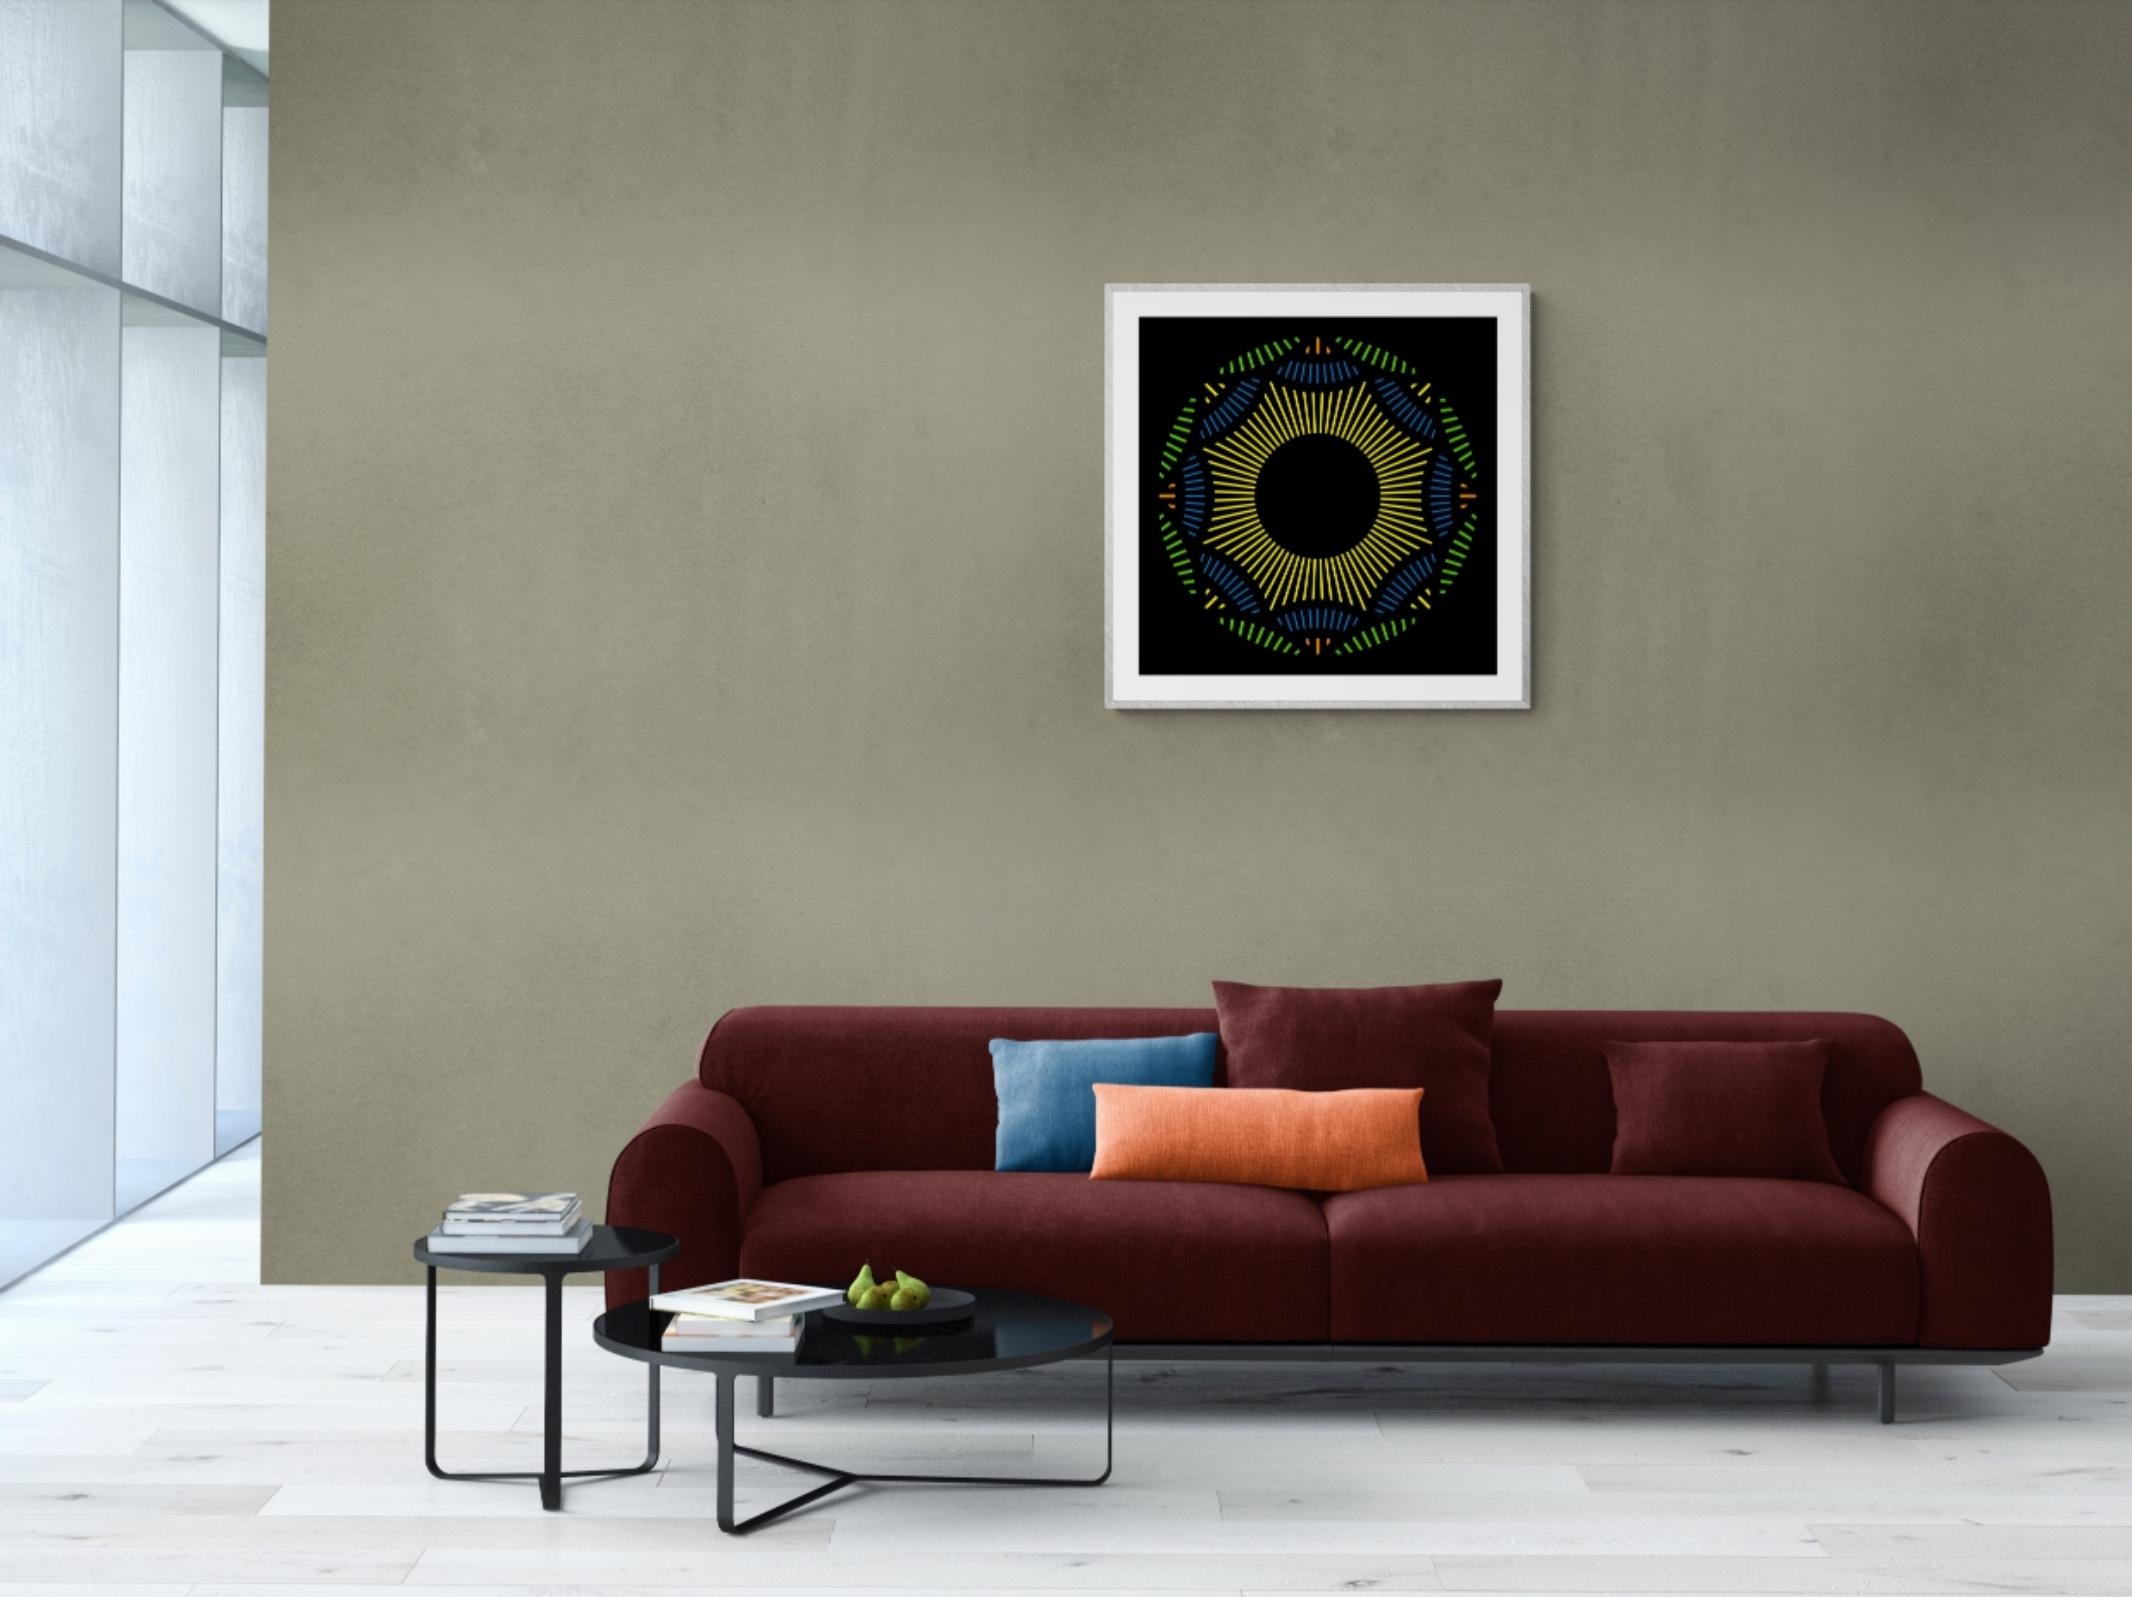 Nebulosa 5 - Black Abstract Print by Julio Campos